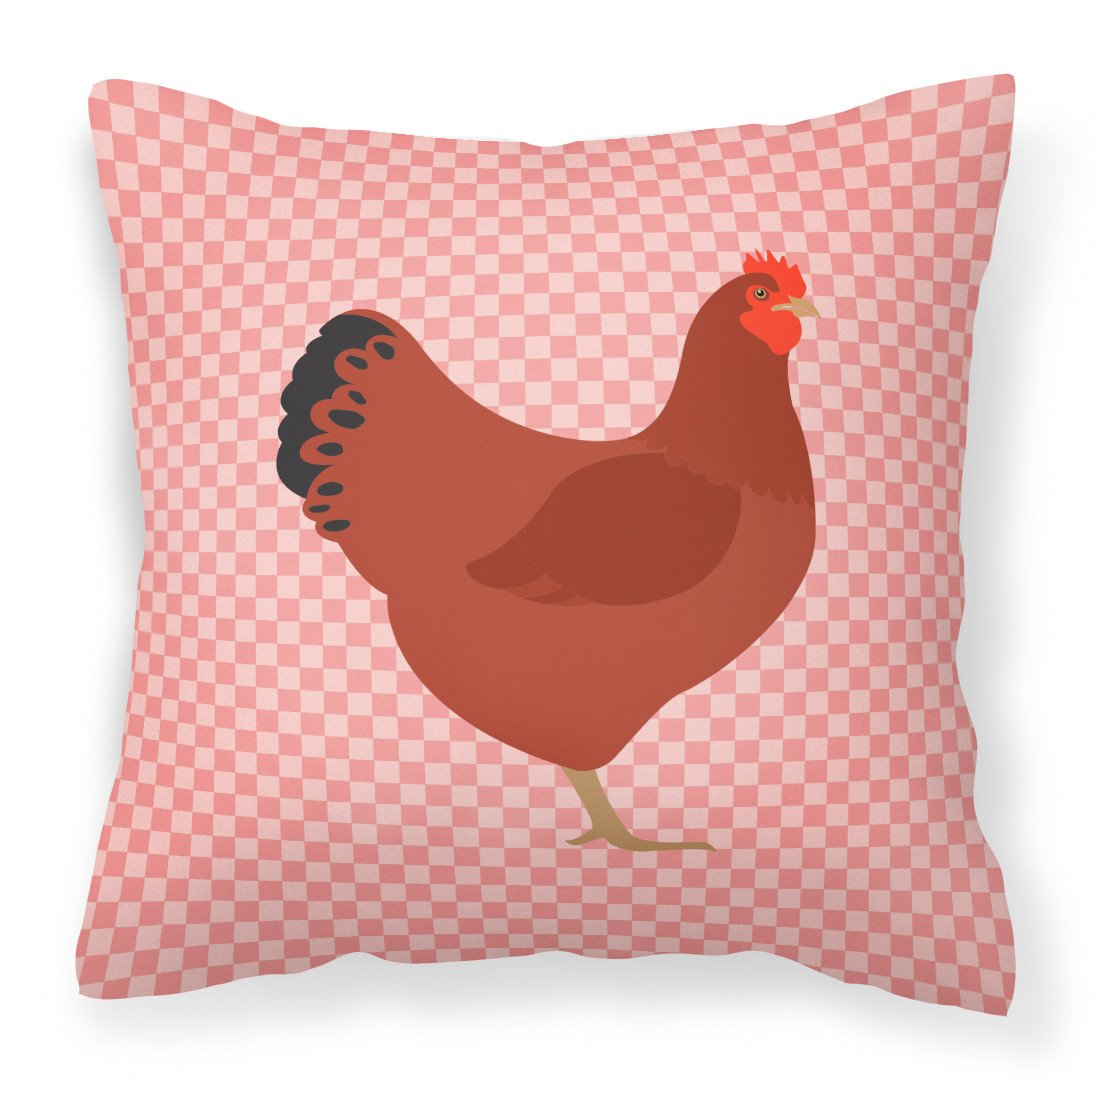 New Hampshire Red Chicken Pink Check Fabric Decorative Pillow BB7843PW1818 by Caroline's Treasures